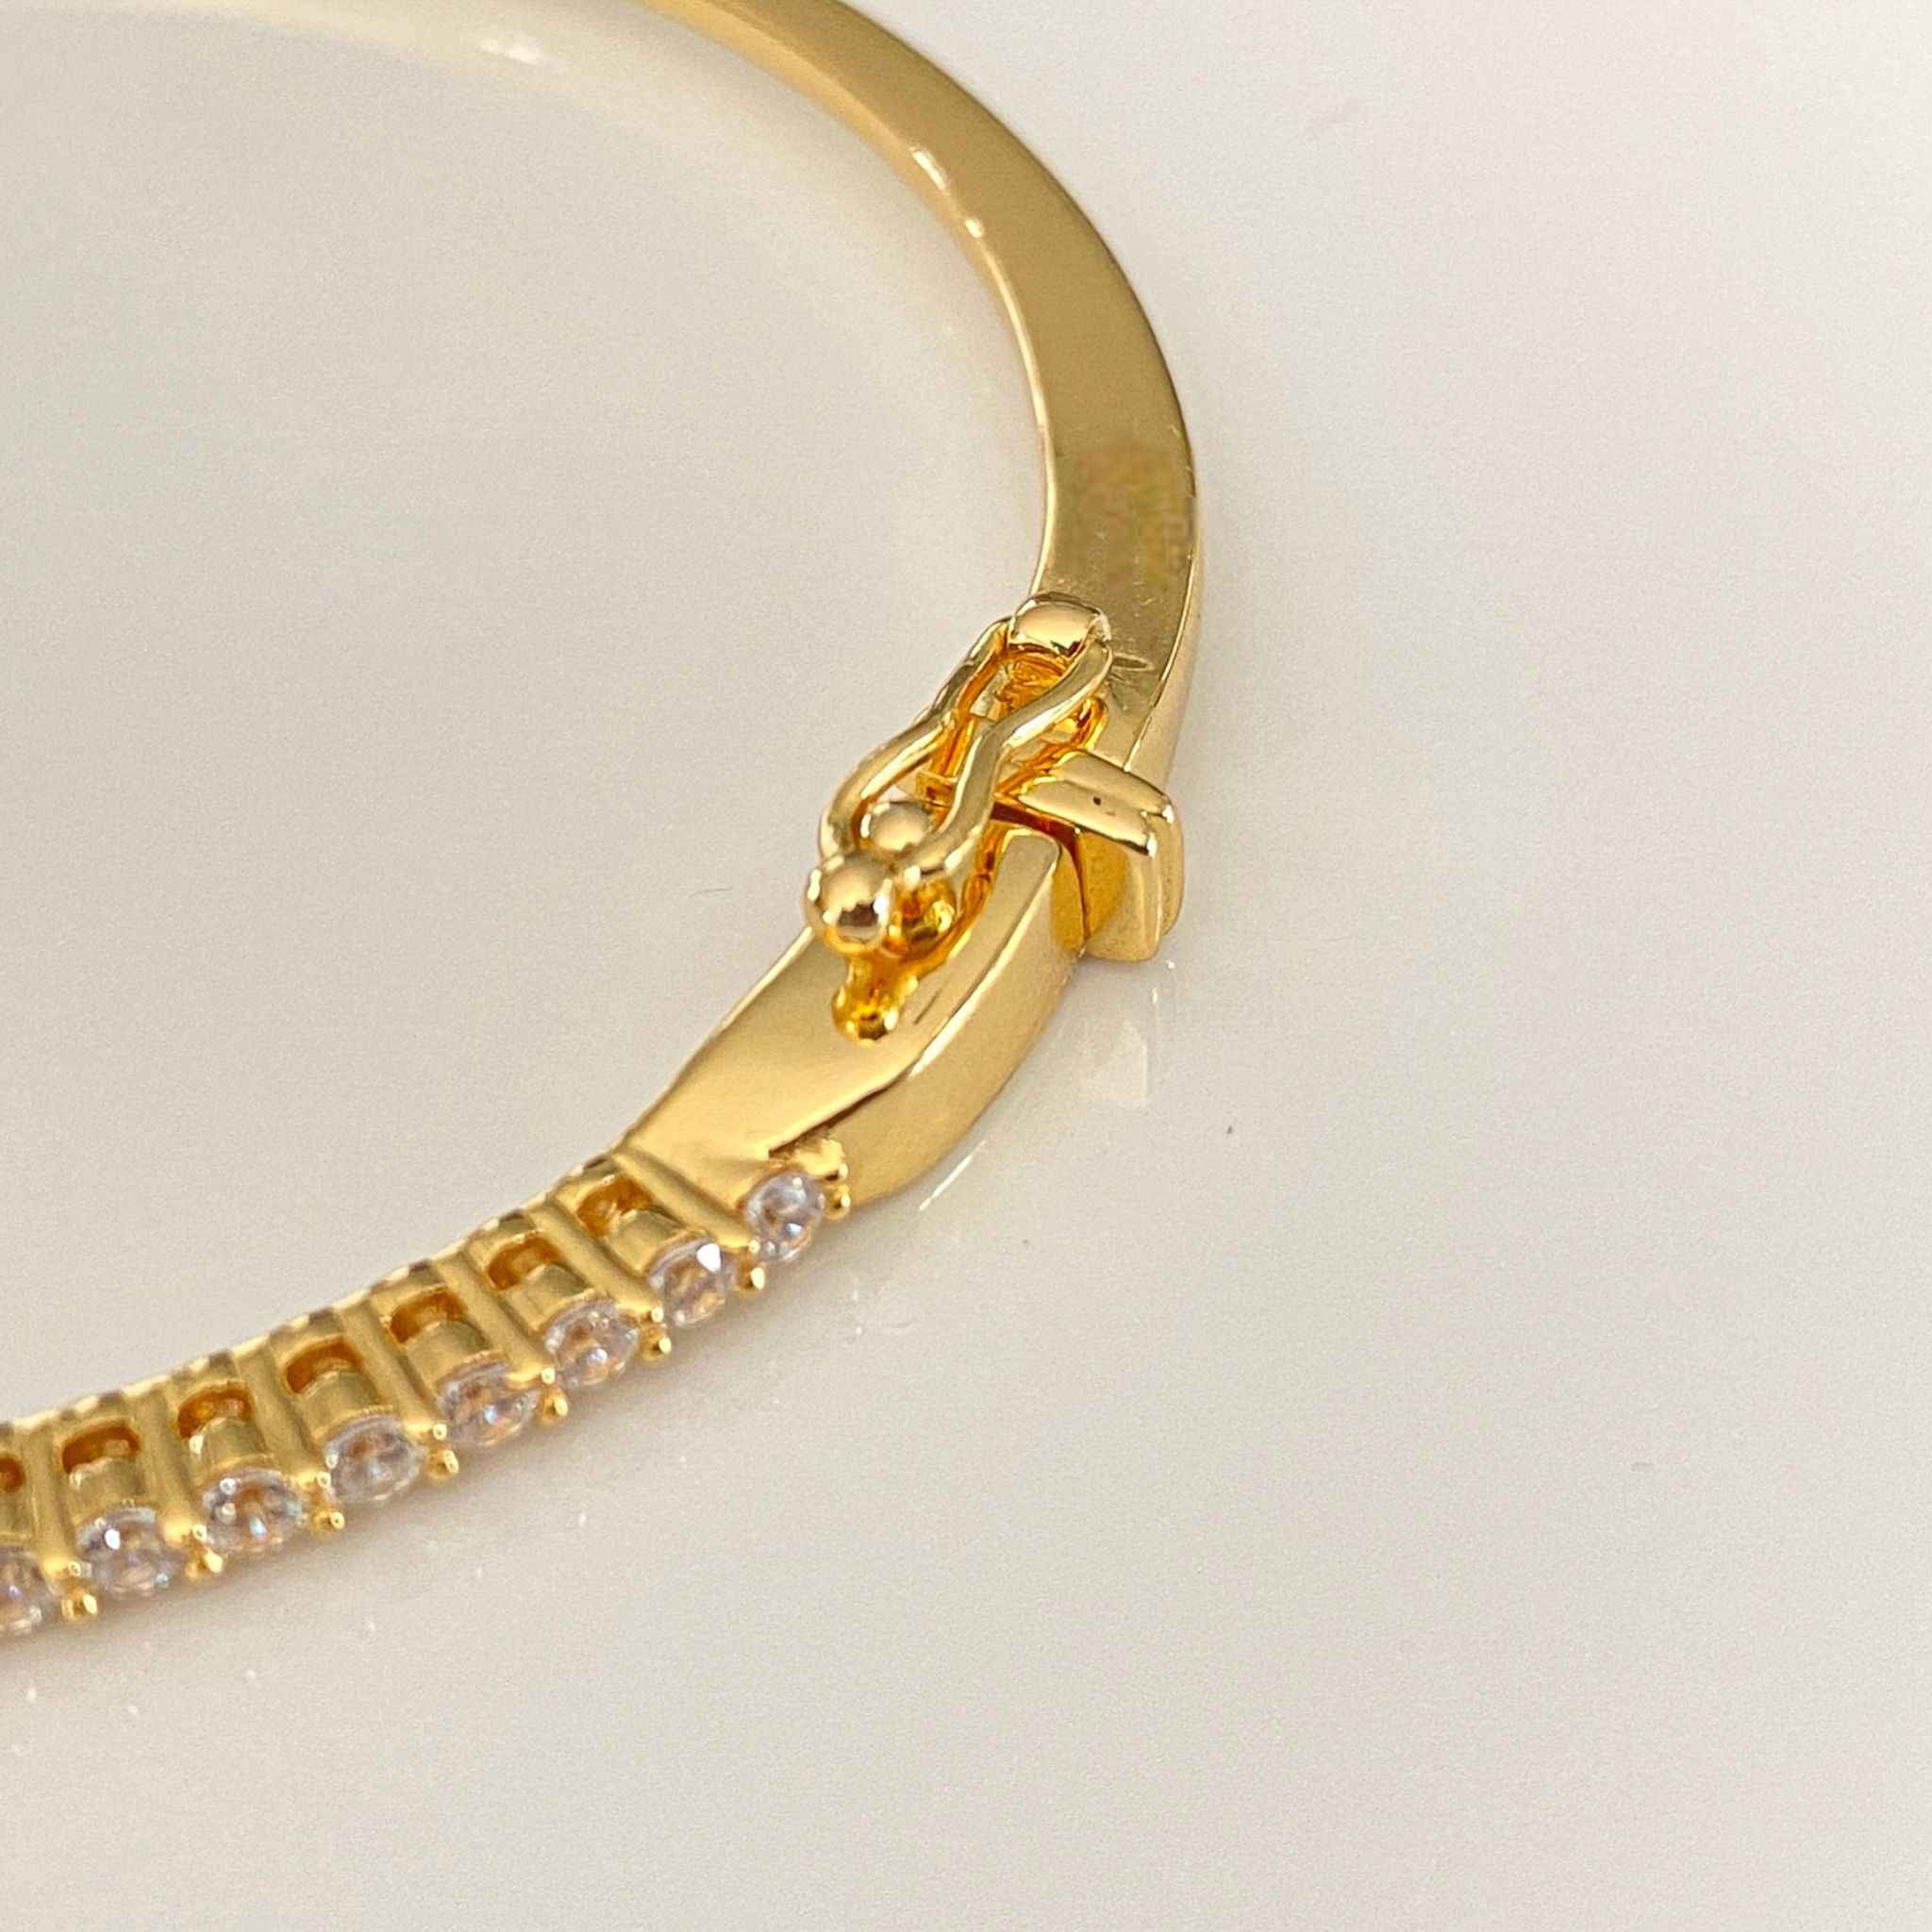 Close-up view of Waverly Gold Bangle clasp by Alessandra James.